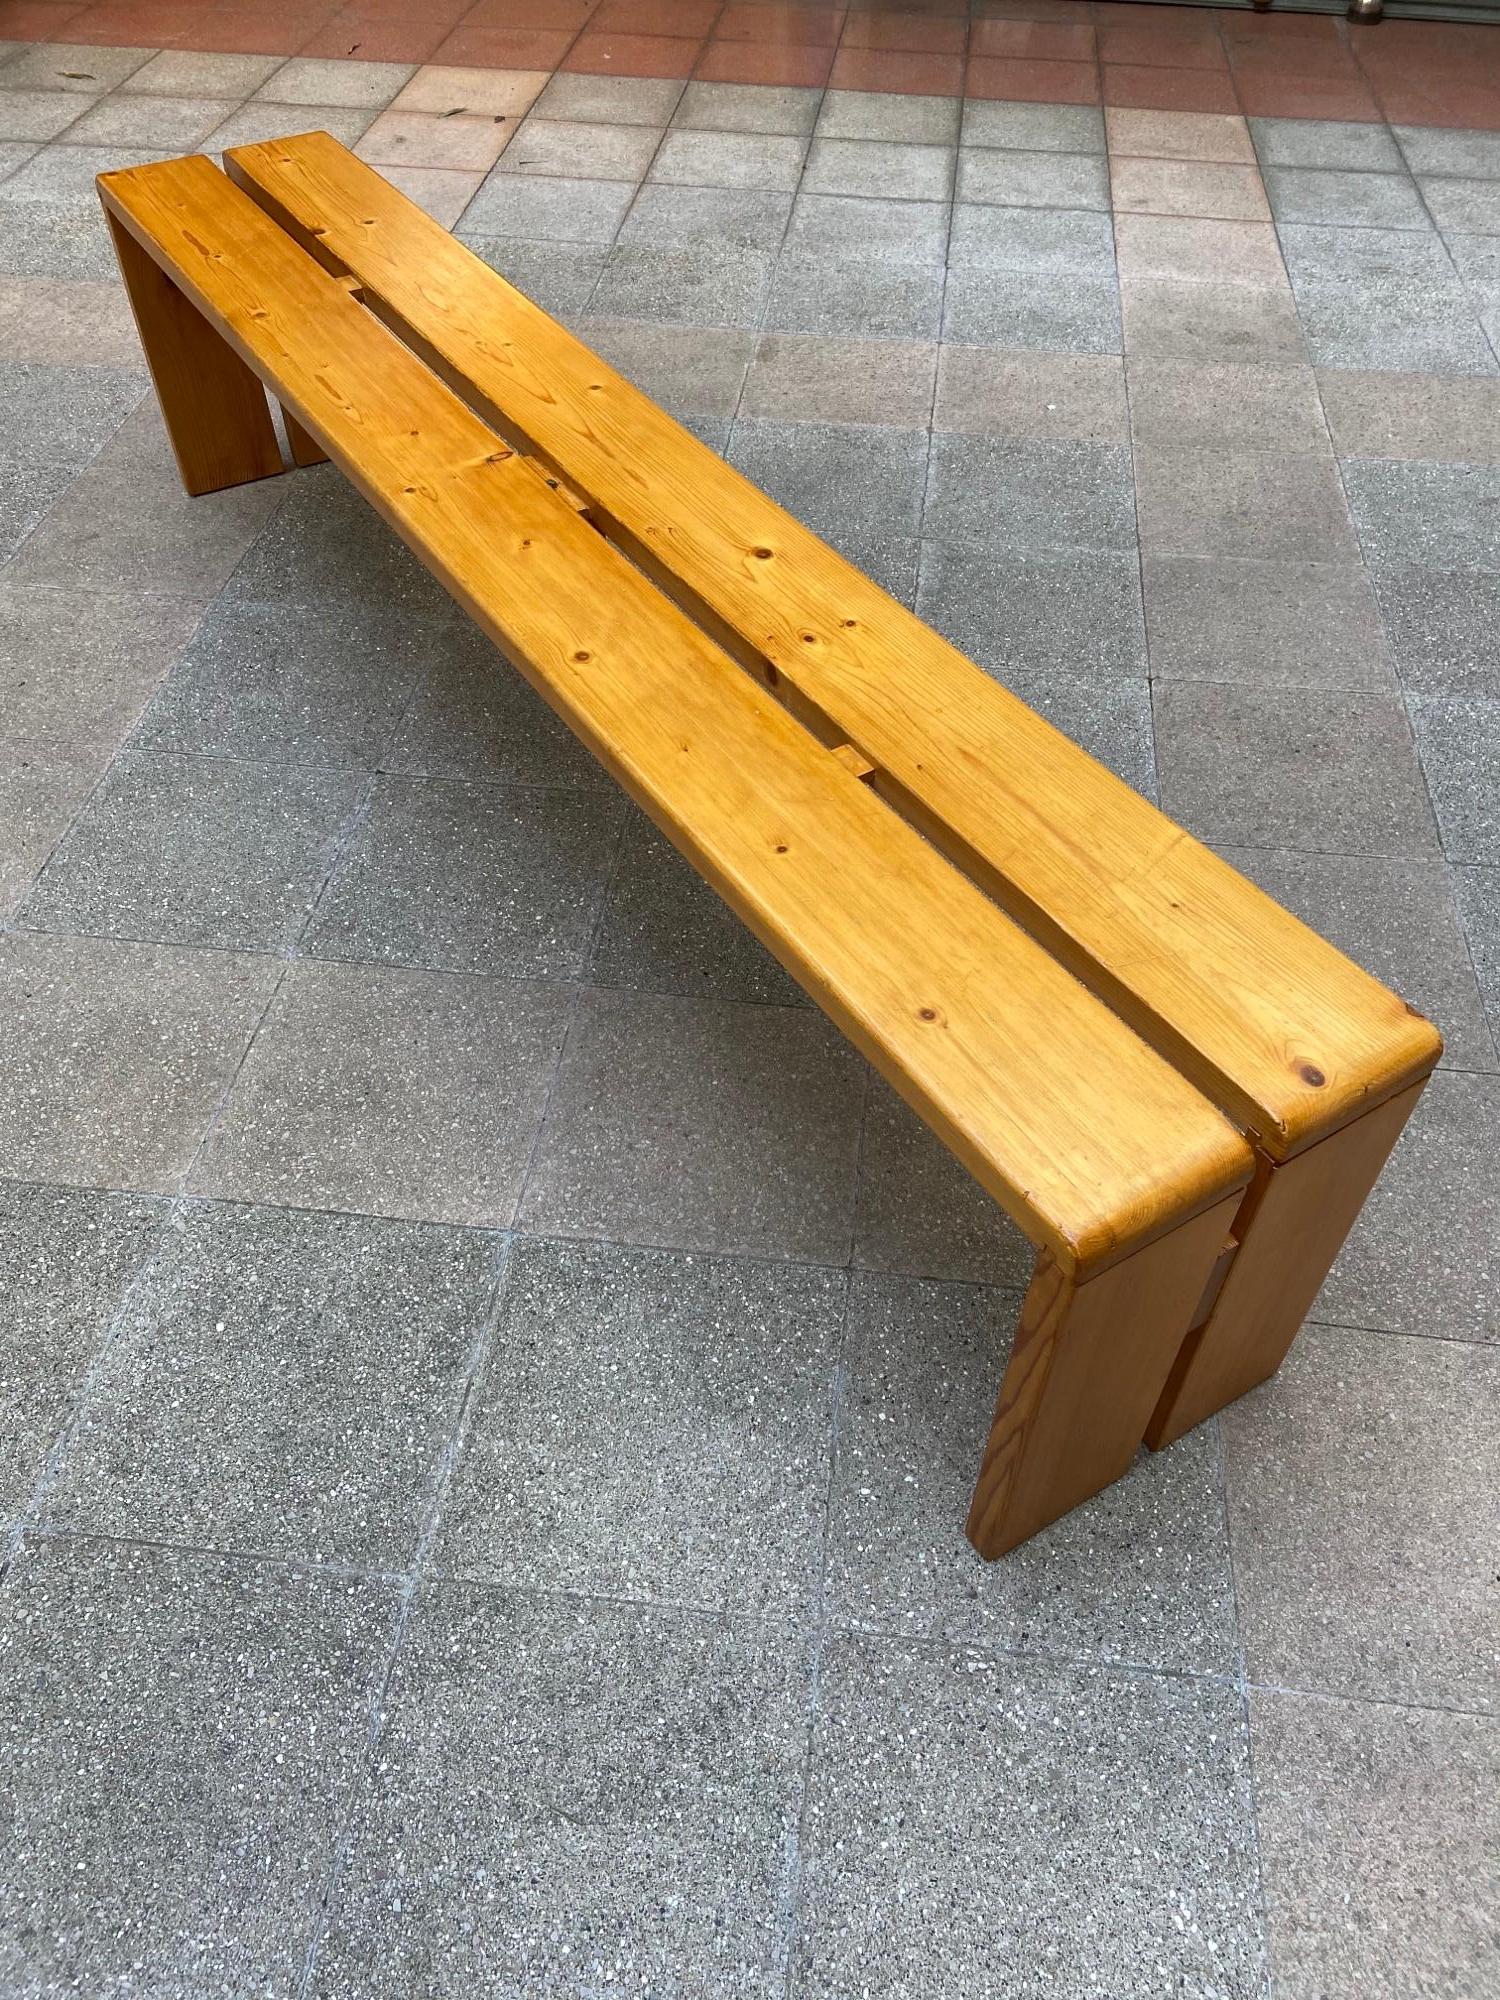 Bench from Les Arcs resort, Savoie. Charlotte Perriand
Solid pine
Design by Charlotte Perriand in 1968
Measures: W 185 x D 30.5 x H 42.5
1500€ per unit.
   